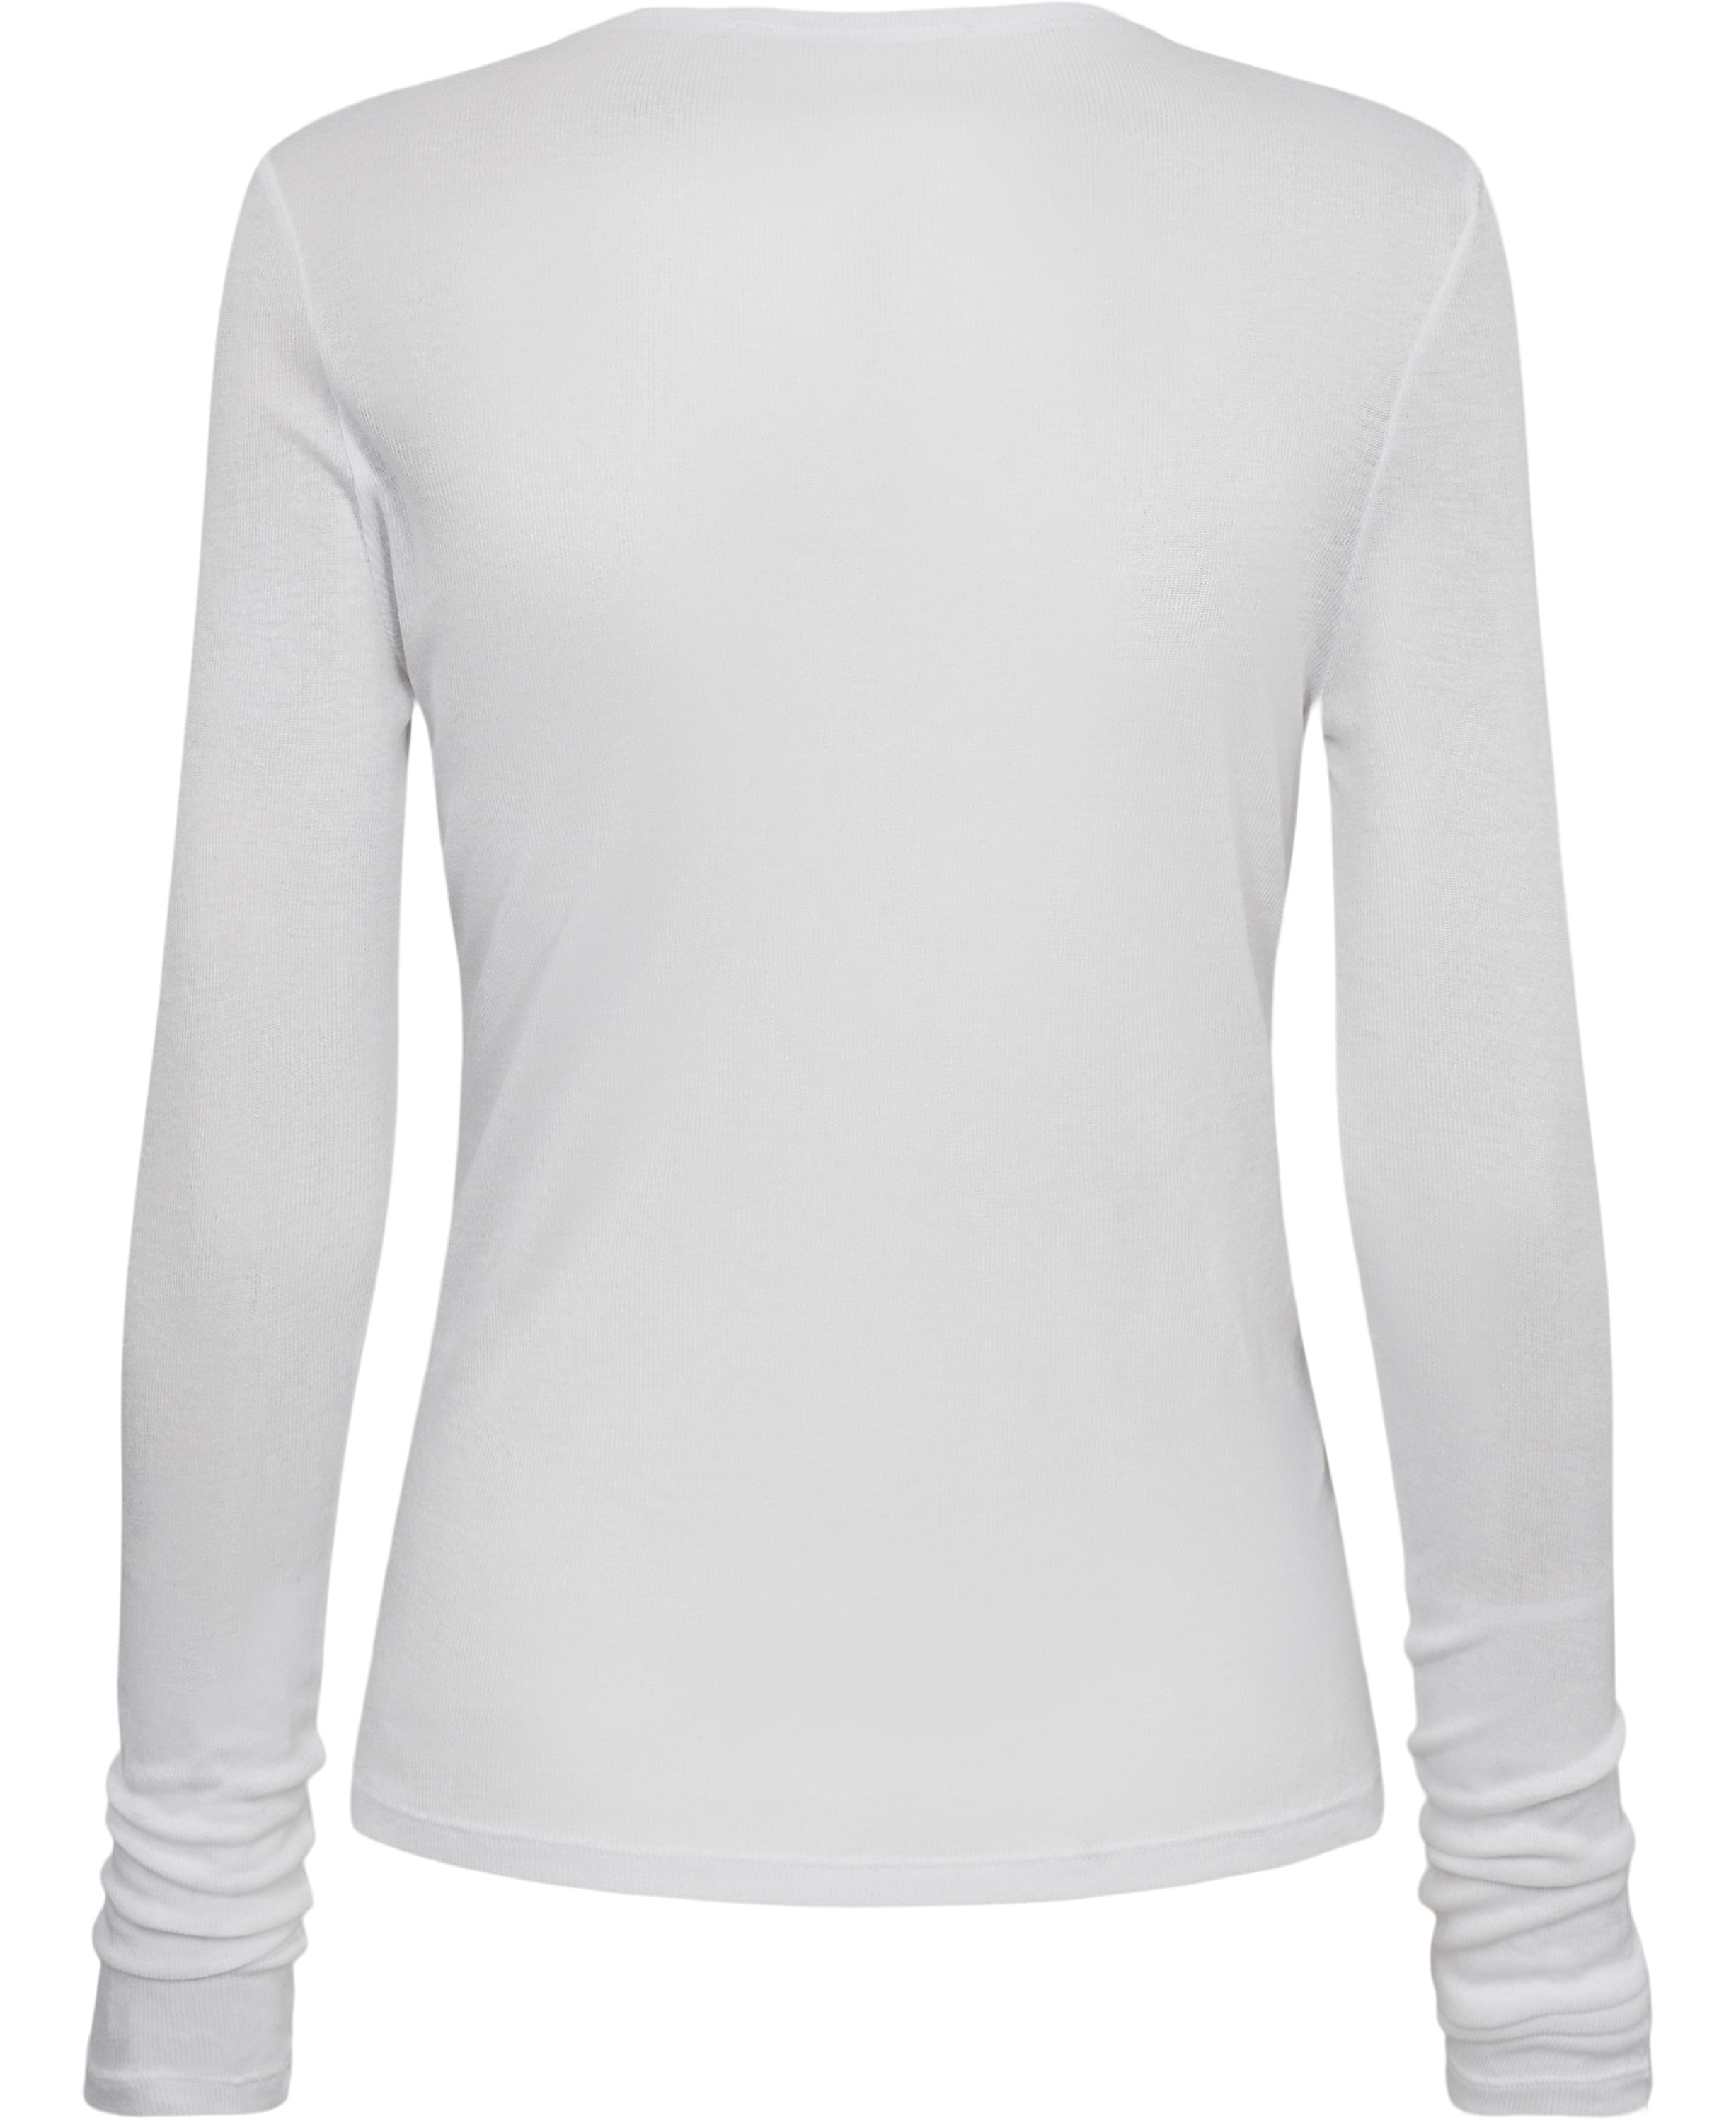 Long Sleeve Fitted Tshirt